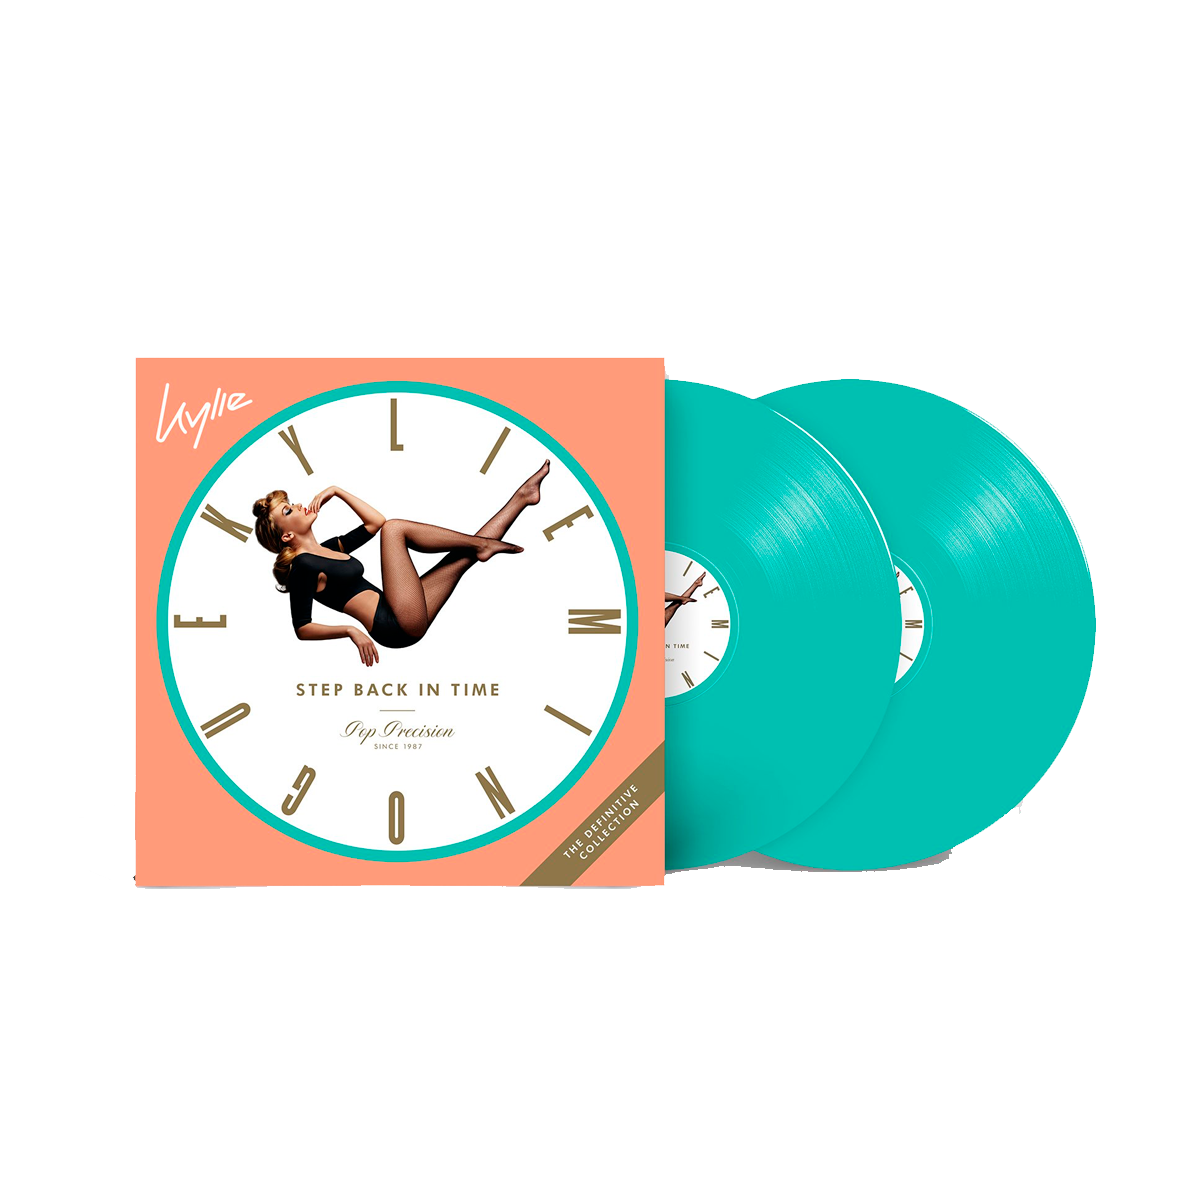 Kylie Minogue Step Back In Time: The Definitive Collection Vinyl